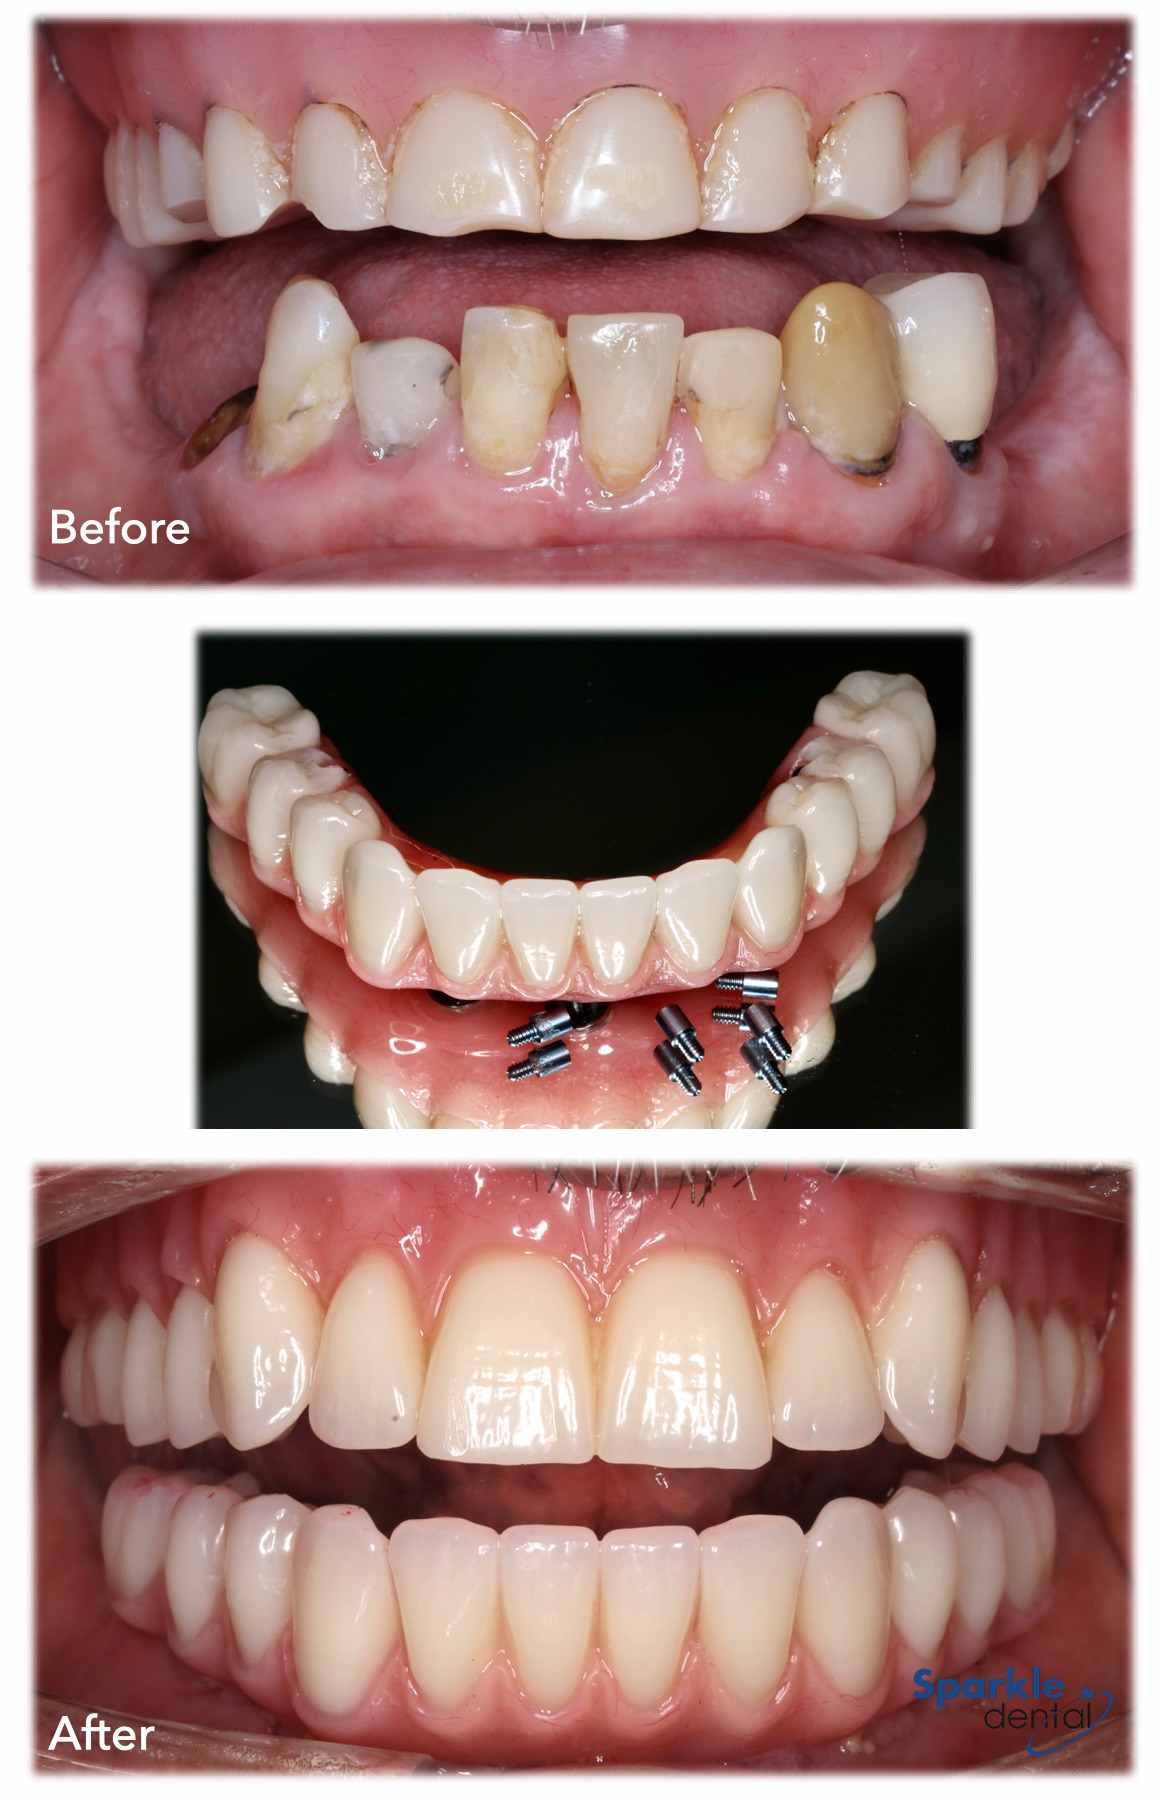 Before & after dental implant treatment